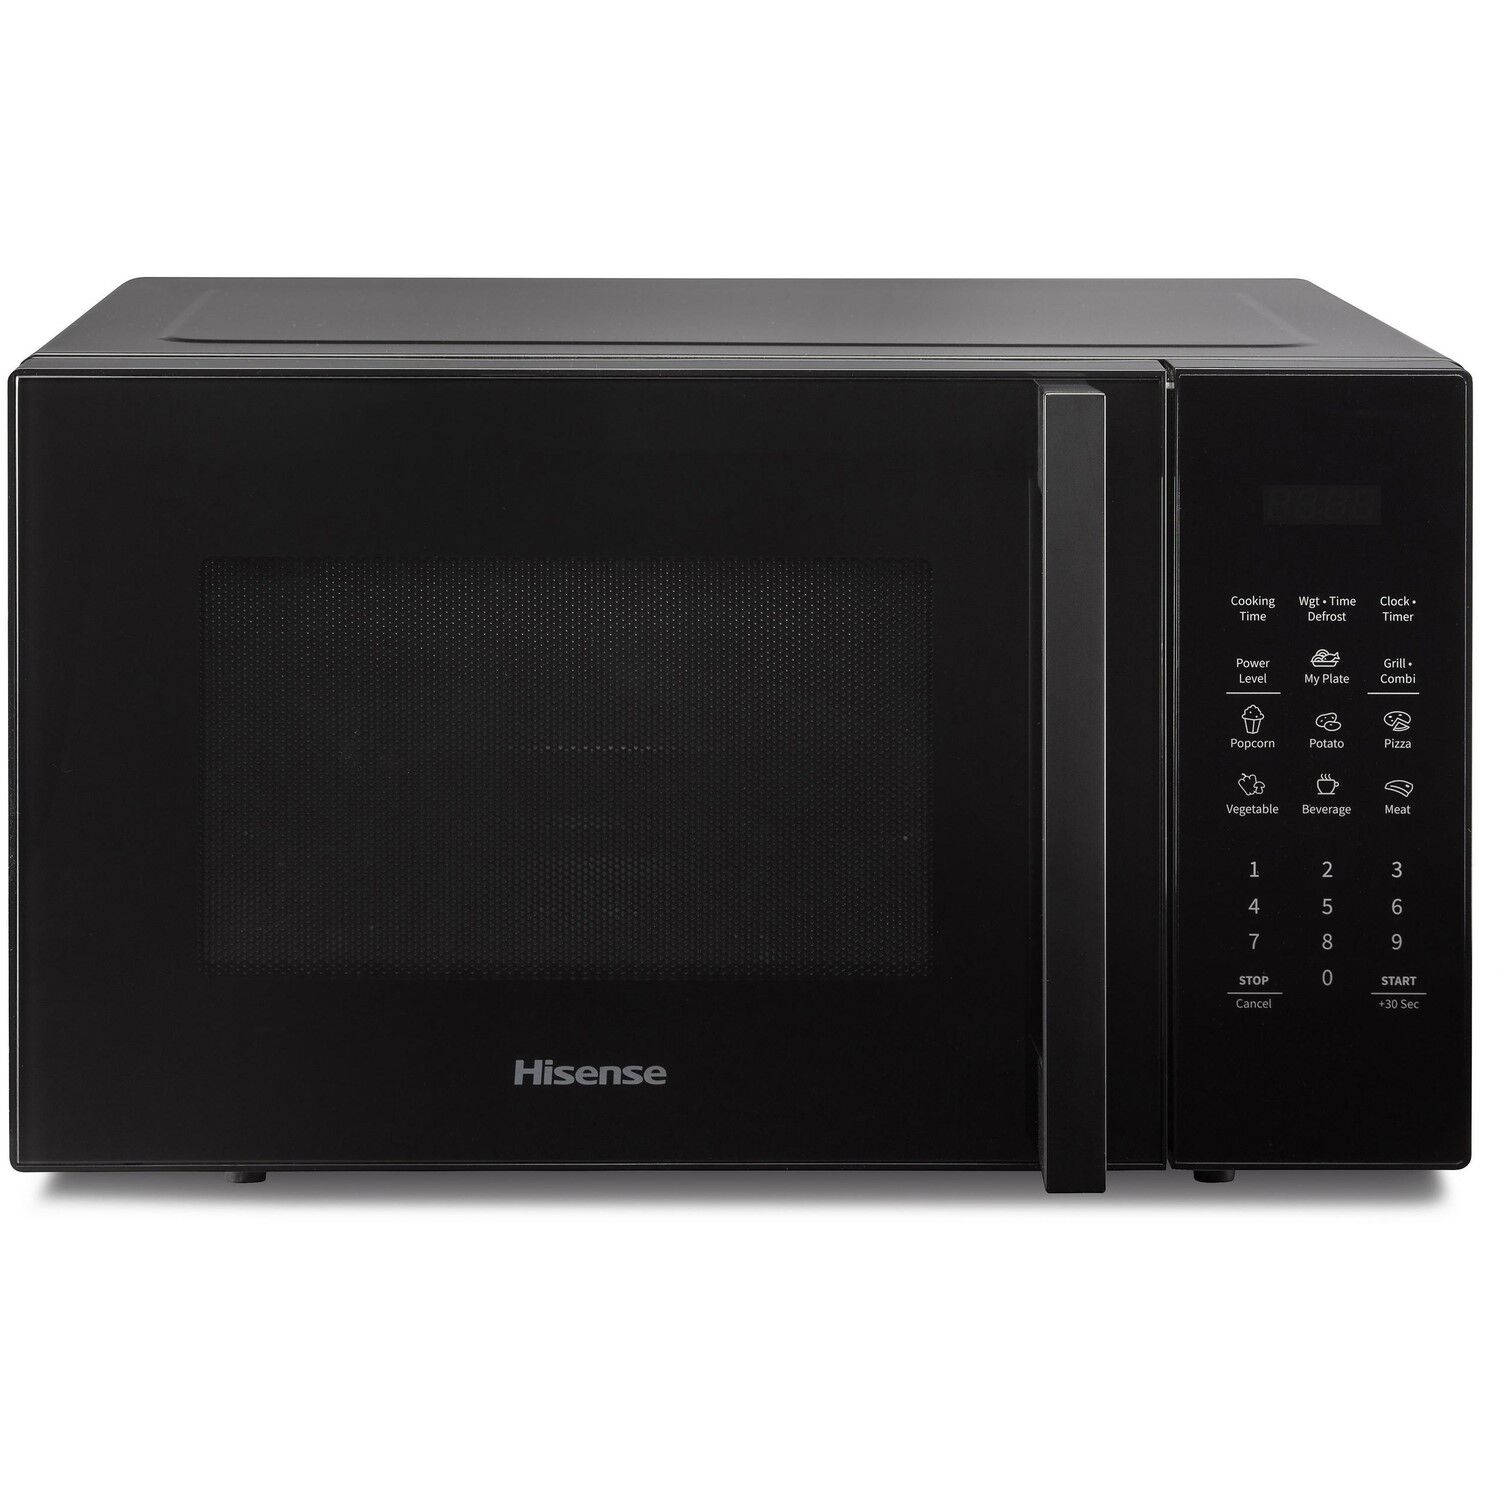 Hisense 28L Microwave Oven With Grill - Black